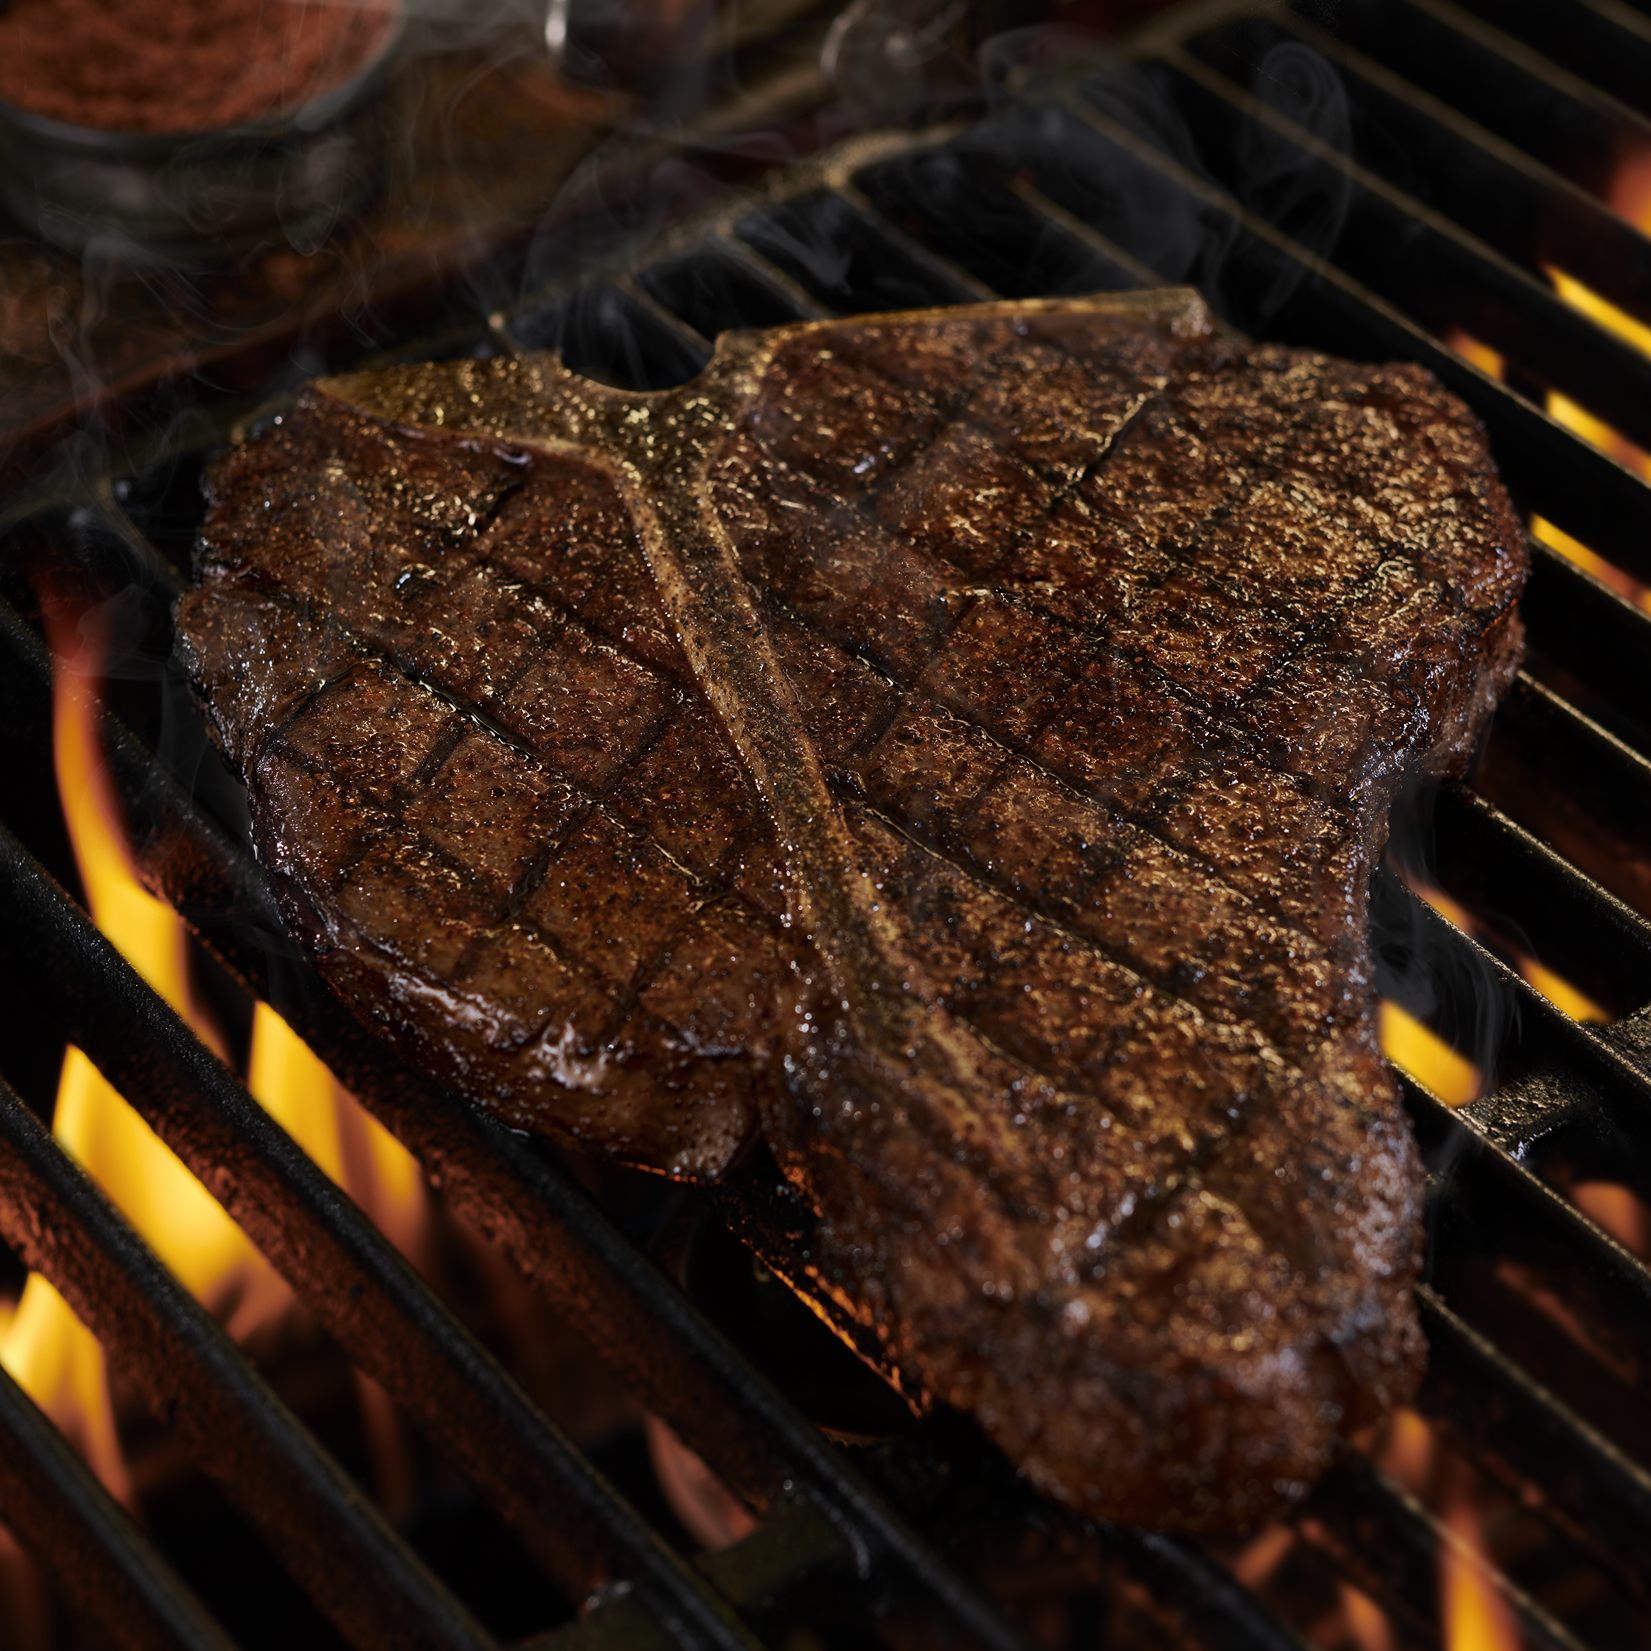 Got the biggest steak in the game wearing our name! The LongHorn porterhouse combines a bone-in stri LongHorn Steakhouse Columbia (410)953-8180